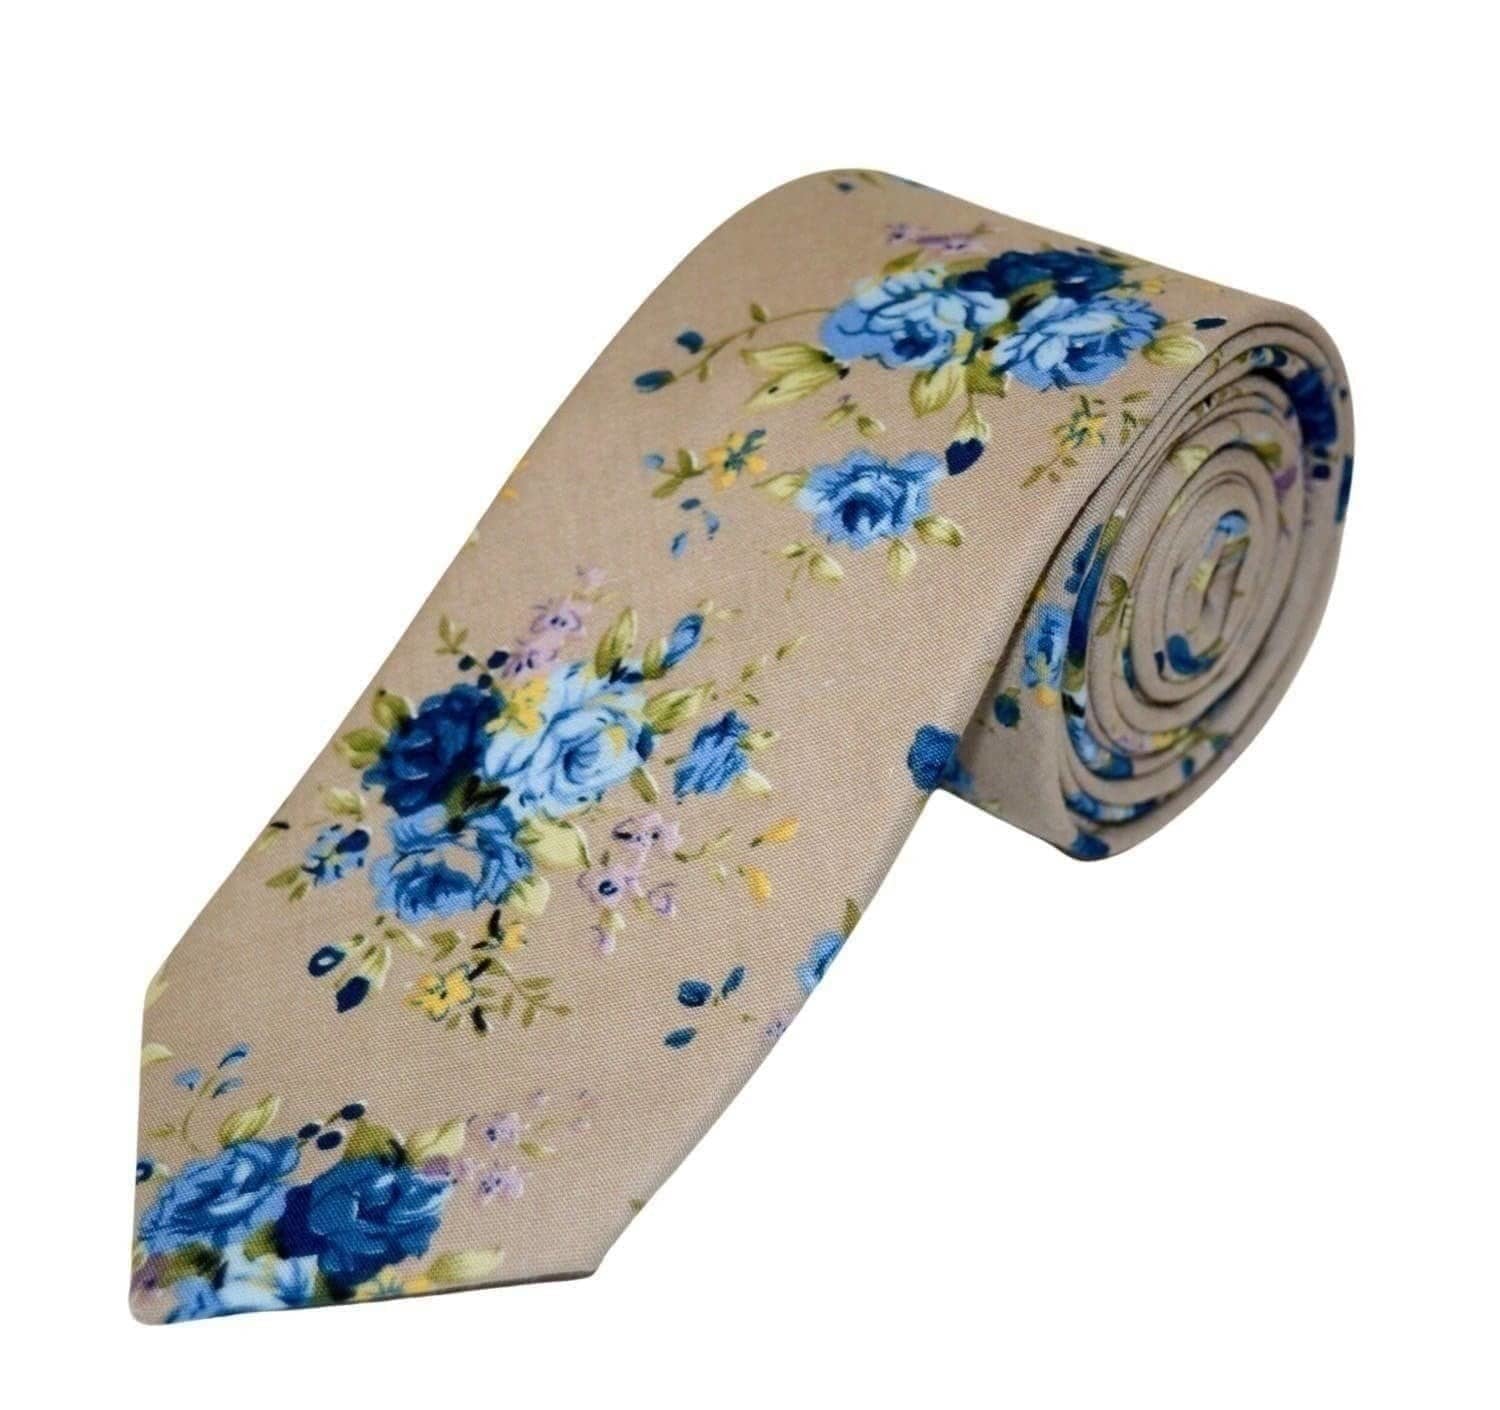 Gray and Blue Floral Skinny Tie 2.36 Mytieshop - CLOUD-Neckties-Gray and Blue Floral Skinny Tie for weddings and events great for prom and gifts Mens ties near me us tie shops cool skinny slim flower ideas gifts-Mytieshop. Skinny ties for weddings anniversaries. Father of bride. Groomsmen. Cool skinny neckties for men. Neckwear for prom, missions and fancy events. Gift ideas for men. Anniversaries ideas. Wedding aesthetics. Flower ties. Dry flower ties.